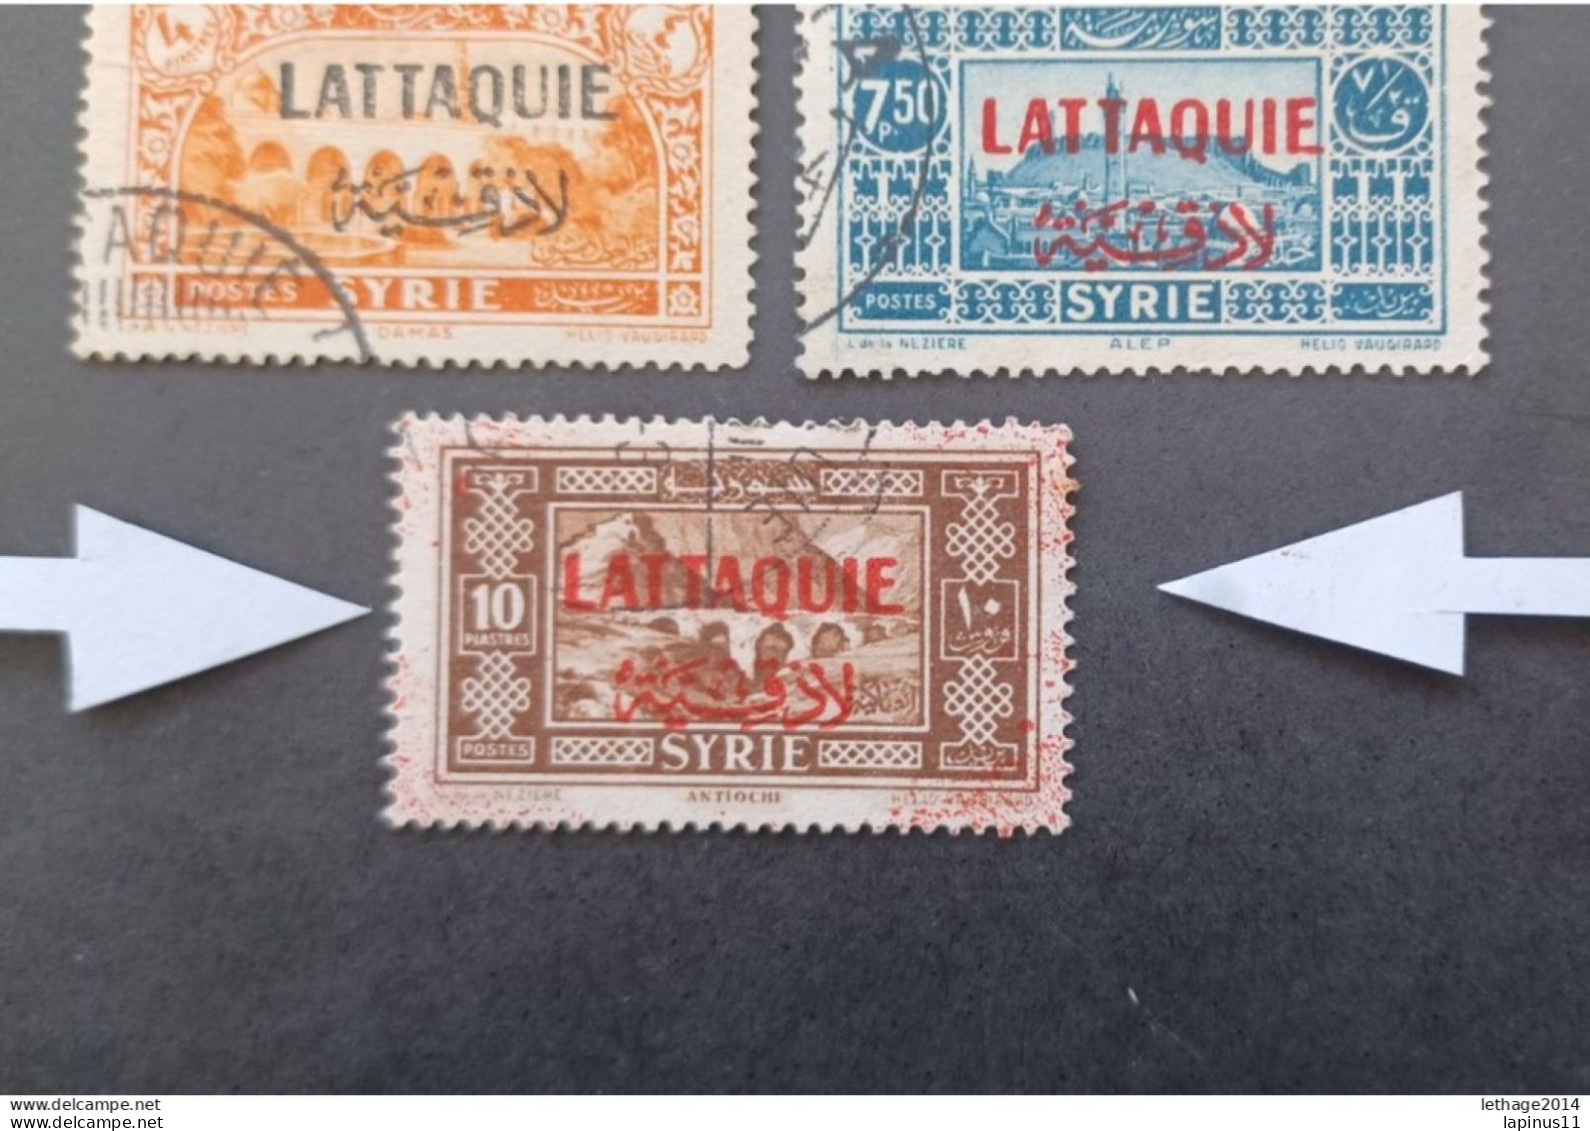 FRENCH OCCUPATION IN SYRIA LATTAQUIE 1940 STAMPS OF SYRIE DE 1930 IN OVERPRINT CAT YVERT N 1....15 RED STAINS - Used Stamps